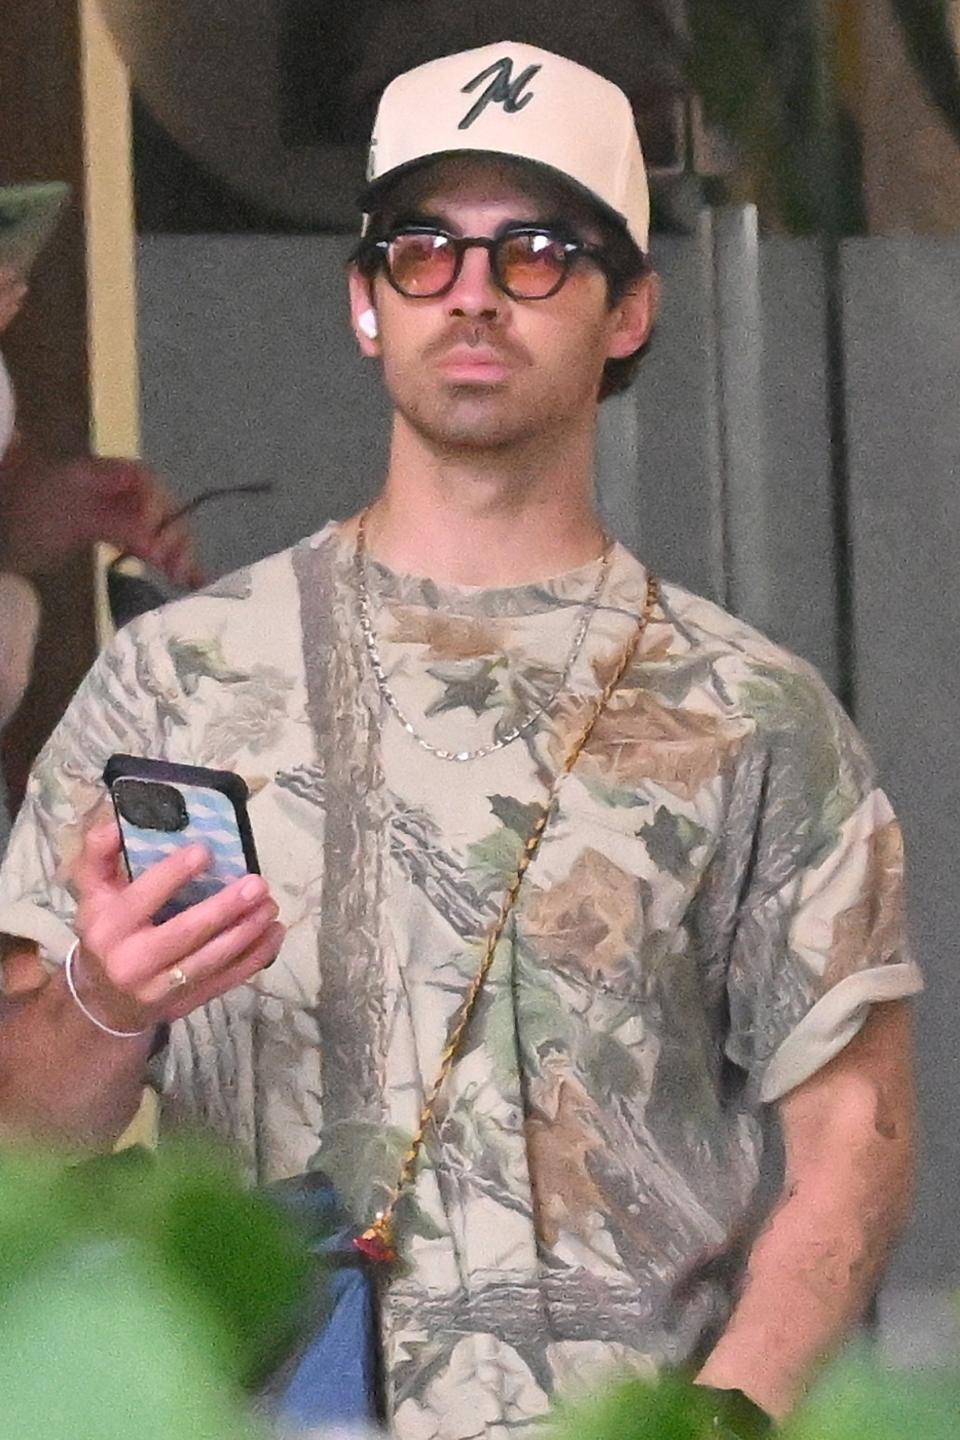 Joe Jonas in camo tee and cap holds phone, sporting sunglasses and a necklace